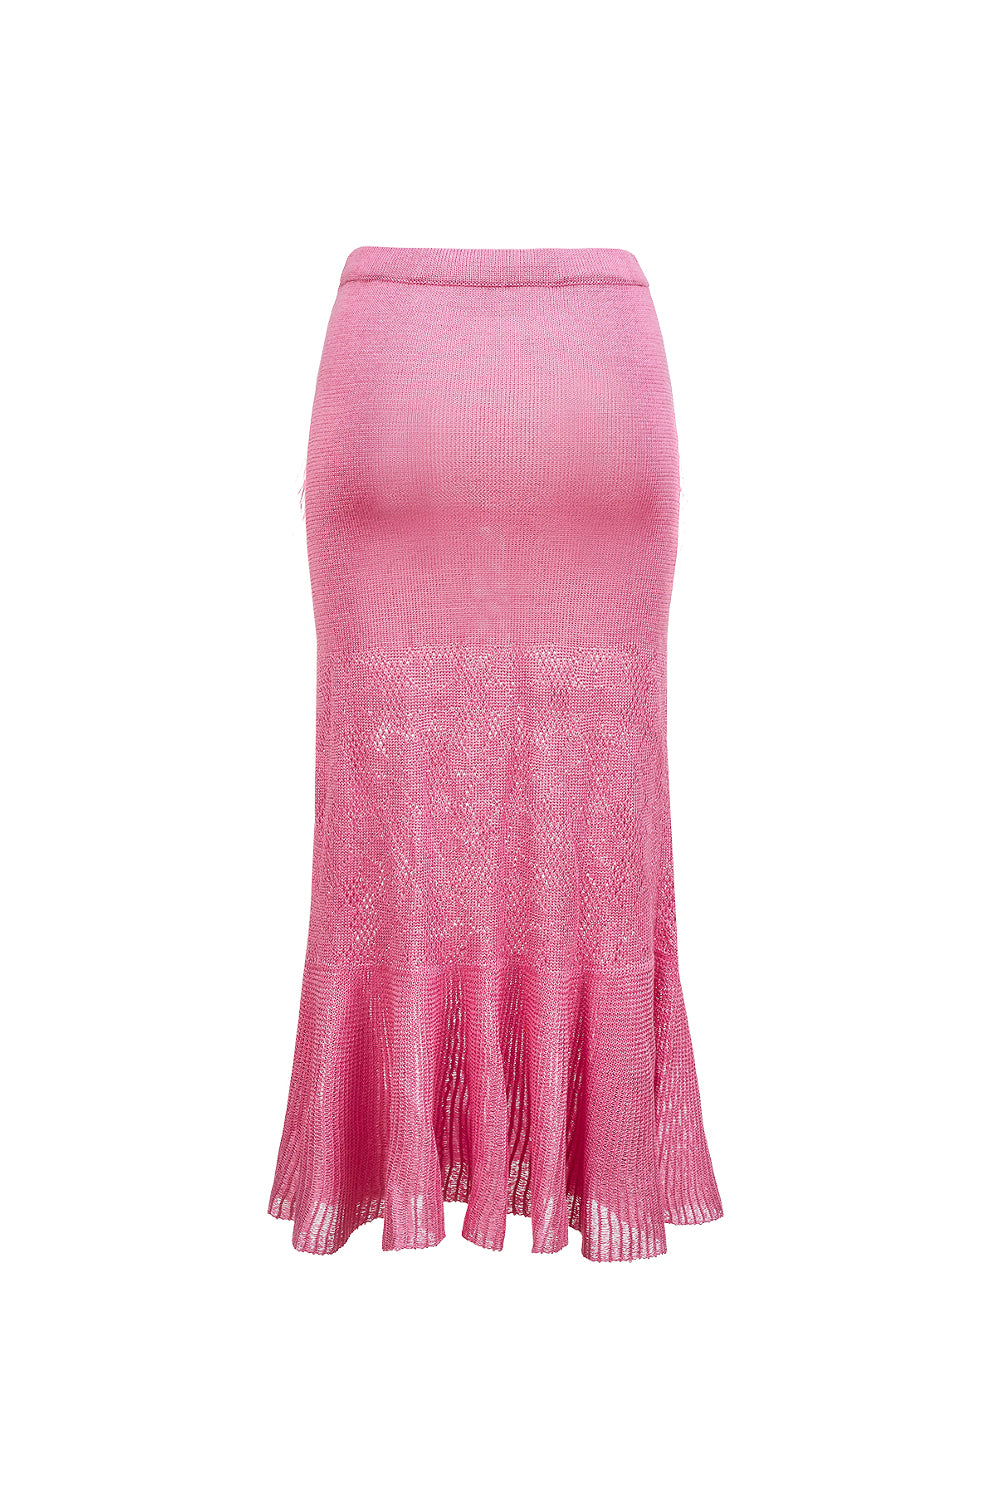 ANDREEVA| Pink Knit Skirt With Feather Details On the Pocket